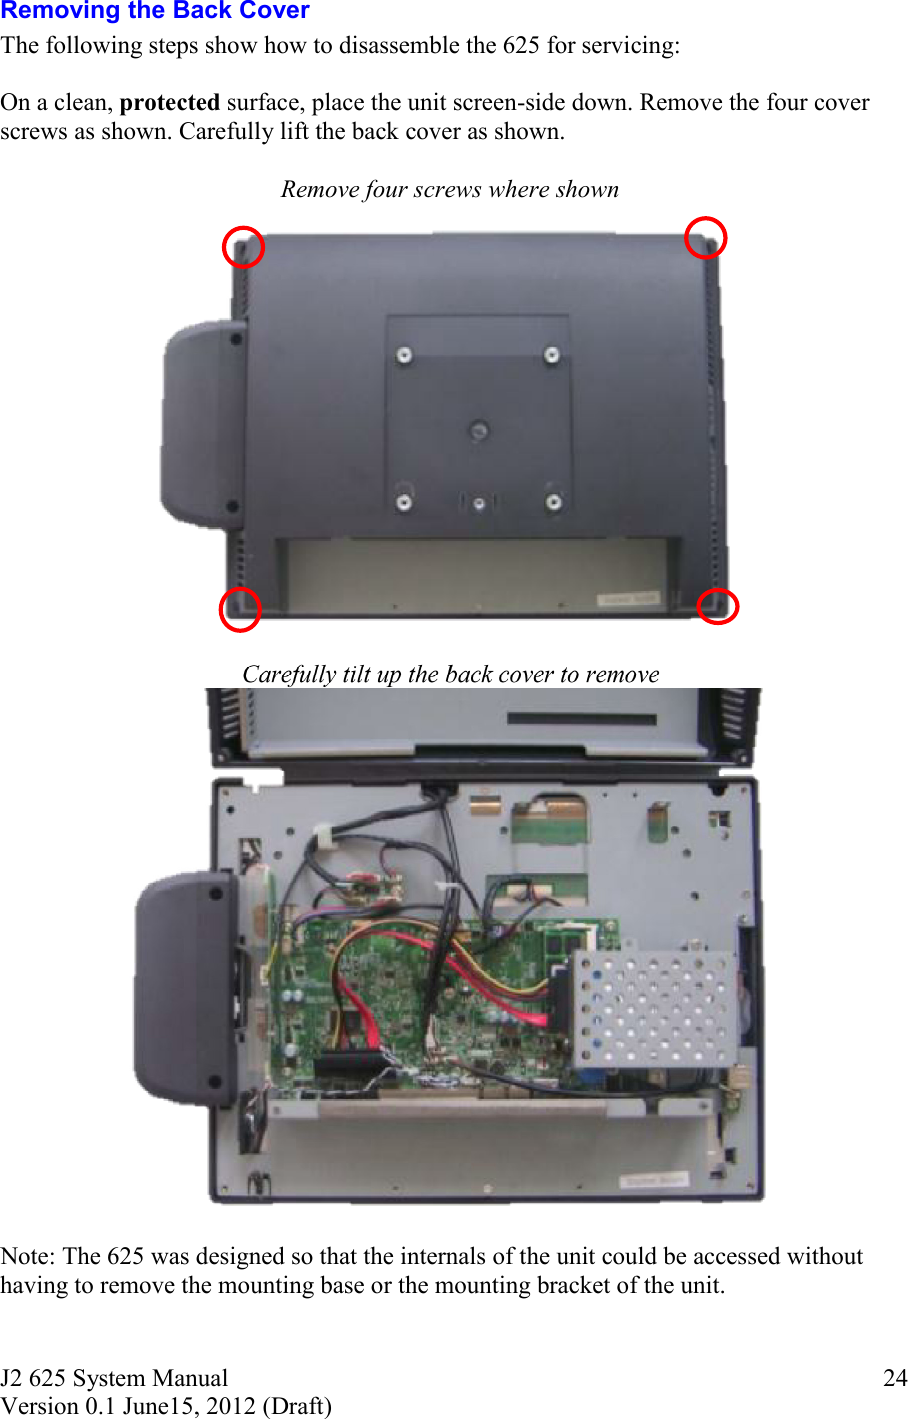 J2 625 System Manual Version 0.1 June15, 2012 (Draft)     24Removing the Back Cover The following steps show how to disassemble the 625 for servicing:  On a clean, protected surface, place the unit screen-side down. Remove the four cover screws as shown. Carefully lift the back cover as shown.  Remove four screws where shown   Carefully tilt up the back cover to remove   Note: The 625 was designed so that the internals of the unit could be accessed without having to remove the mounting base or the mounting bracket of the unit.  